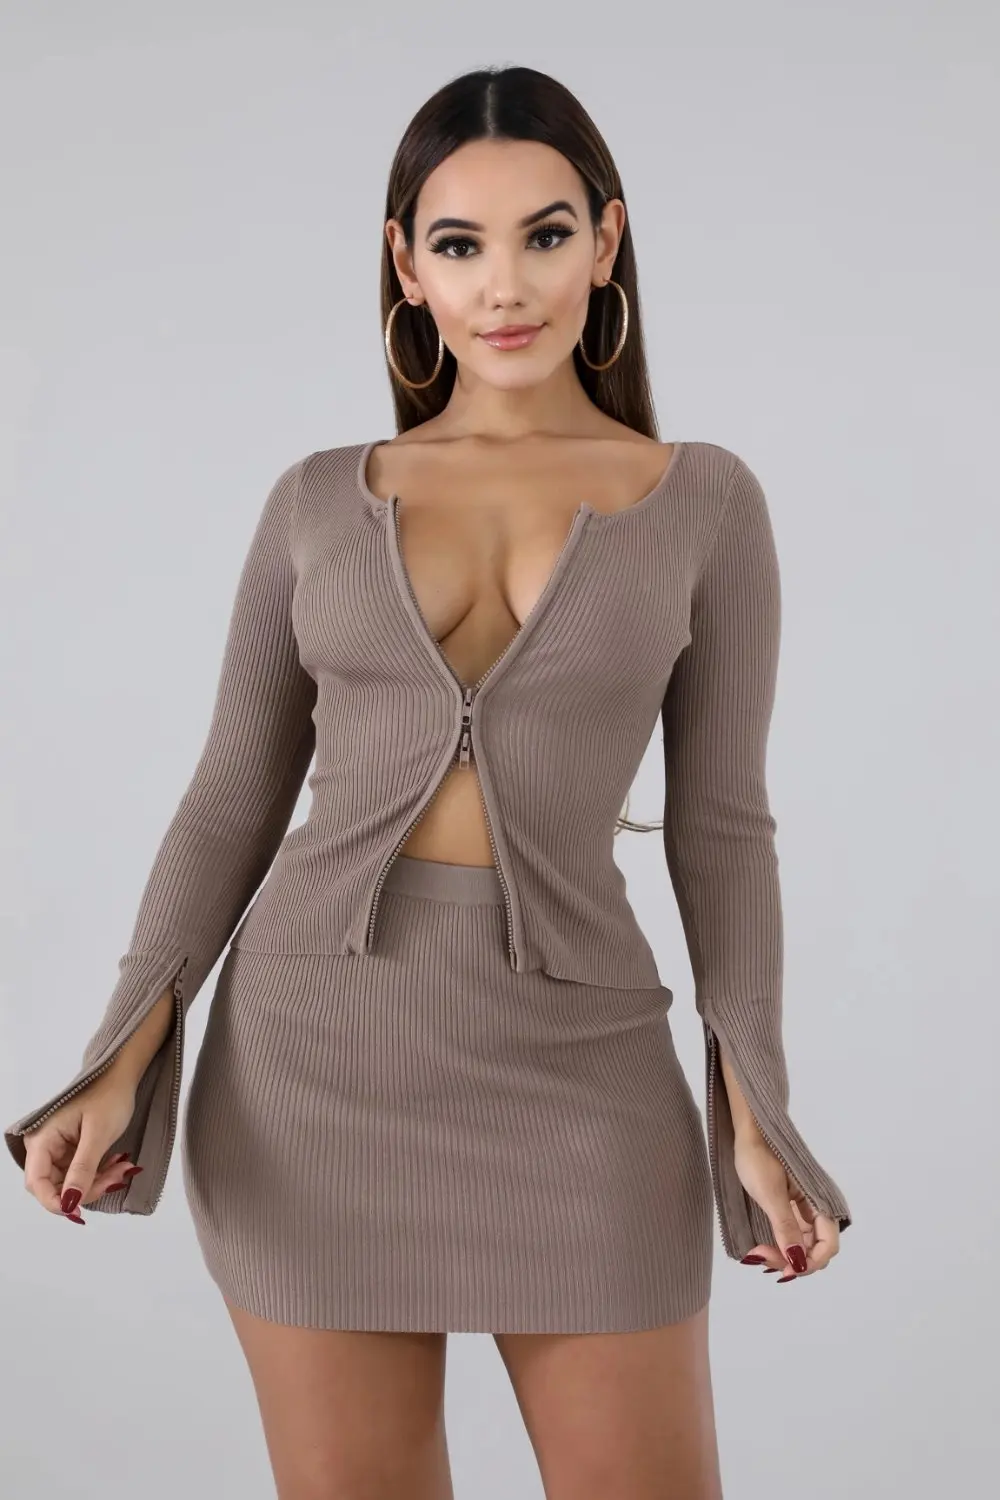 KGFIGU Kylie jenner ribbed tops and skirts sets Summer two pieces sets sexy zipper full sleeve brown matching sets outfits